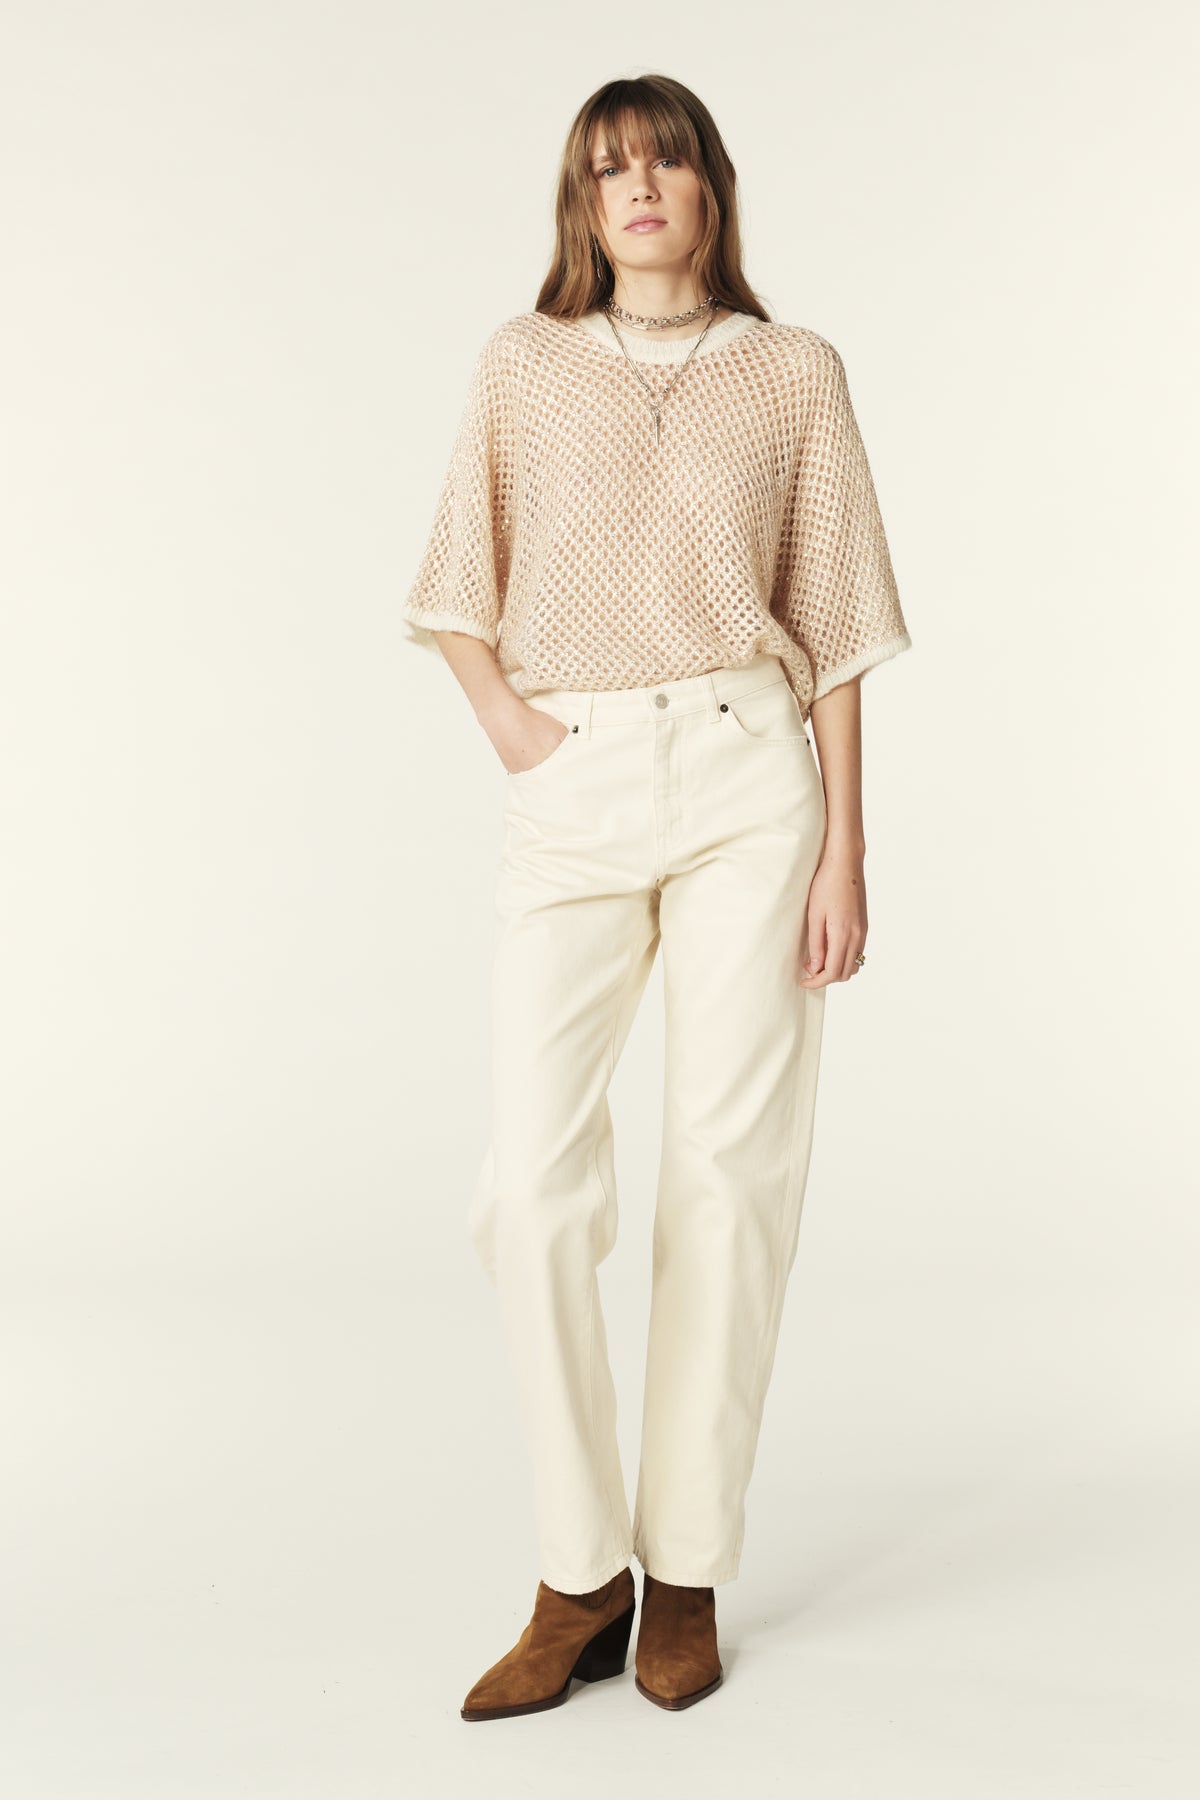 Crew neck open knit in ecru with tiny gold sequin yarn throughout with grown on short sleeves